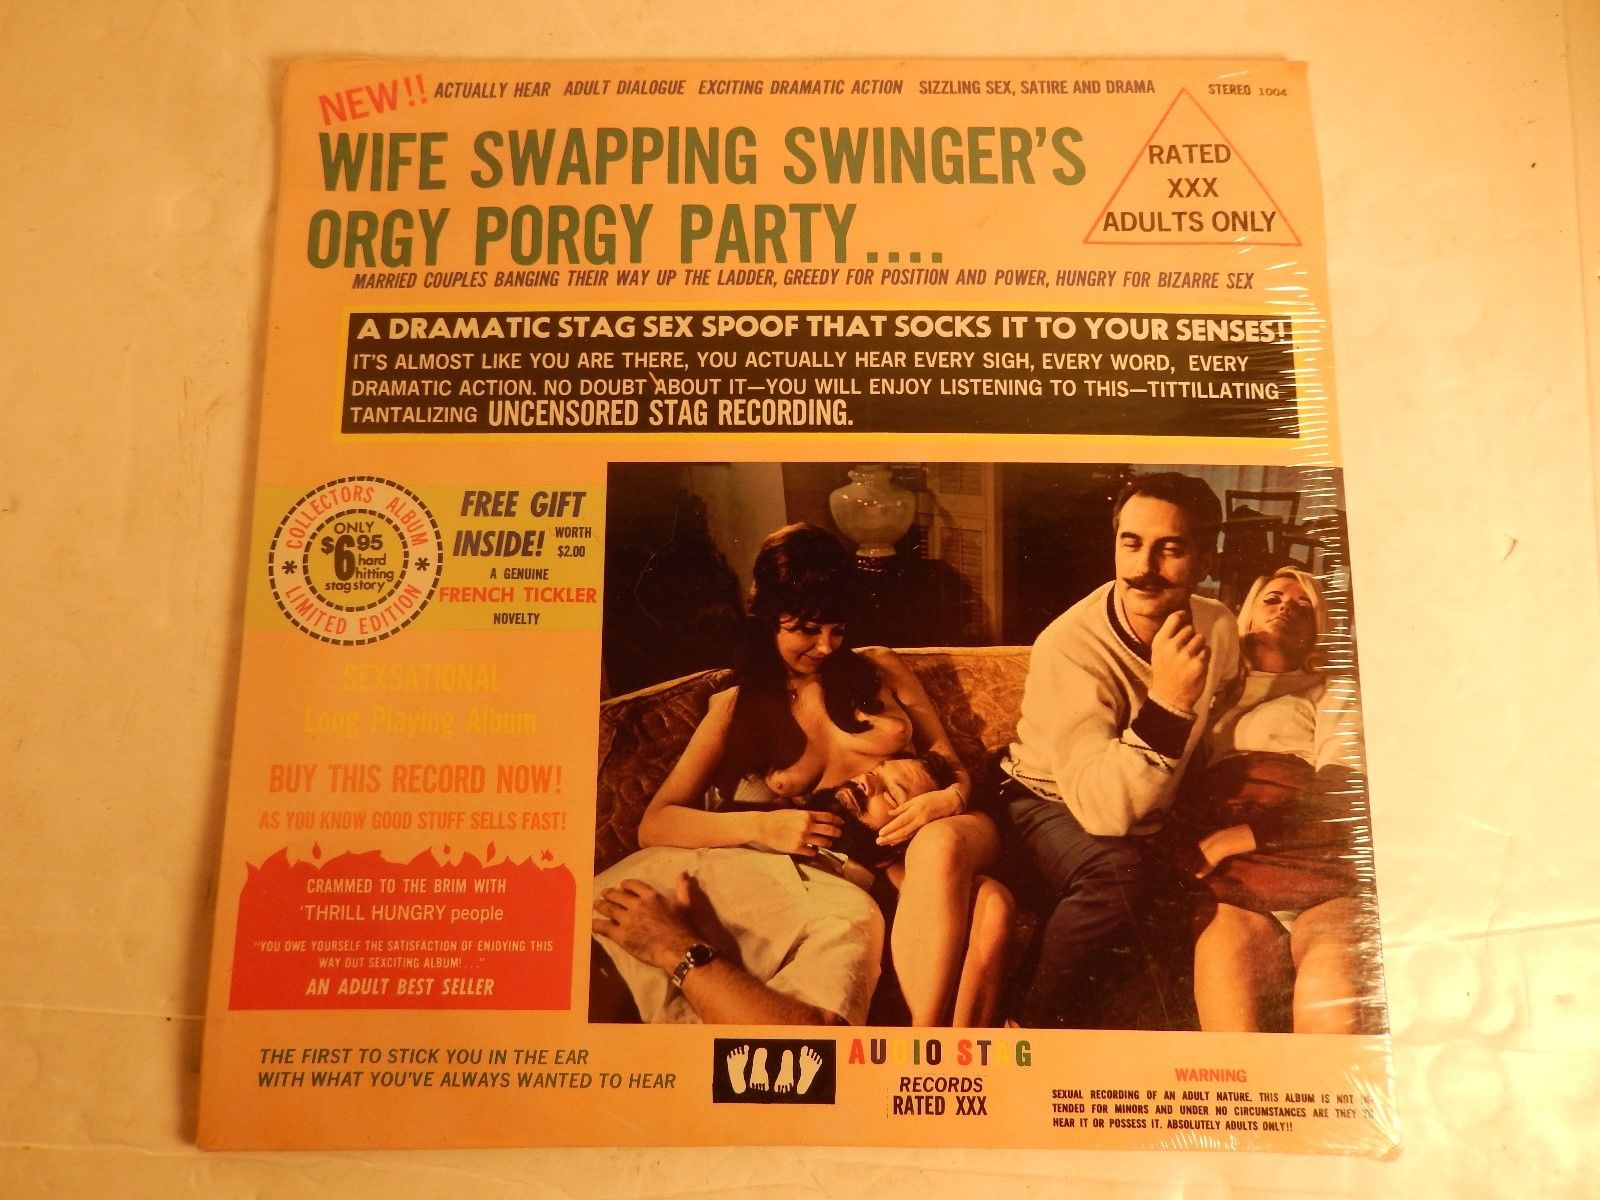 popsike - Vintage Sealed LP Audio Stag Records Adult XXX Wife Swapping Swingers Orgy Porgy pic